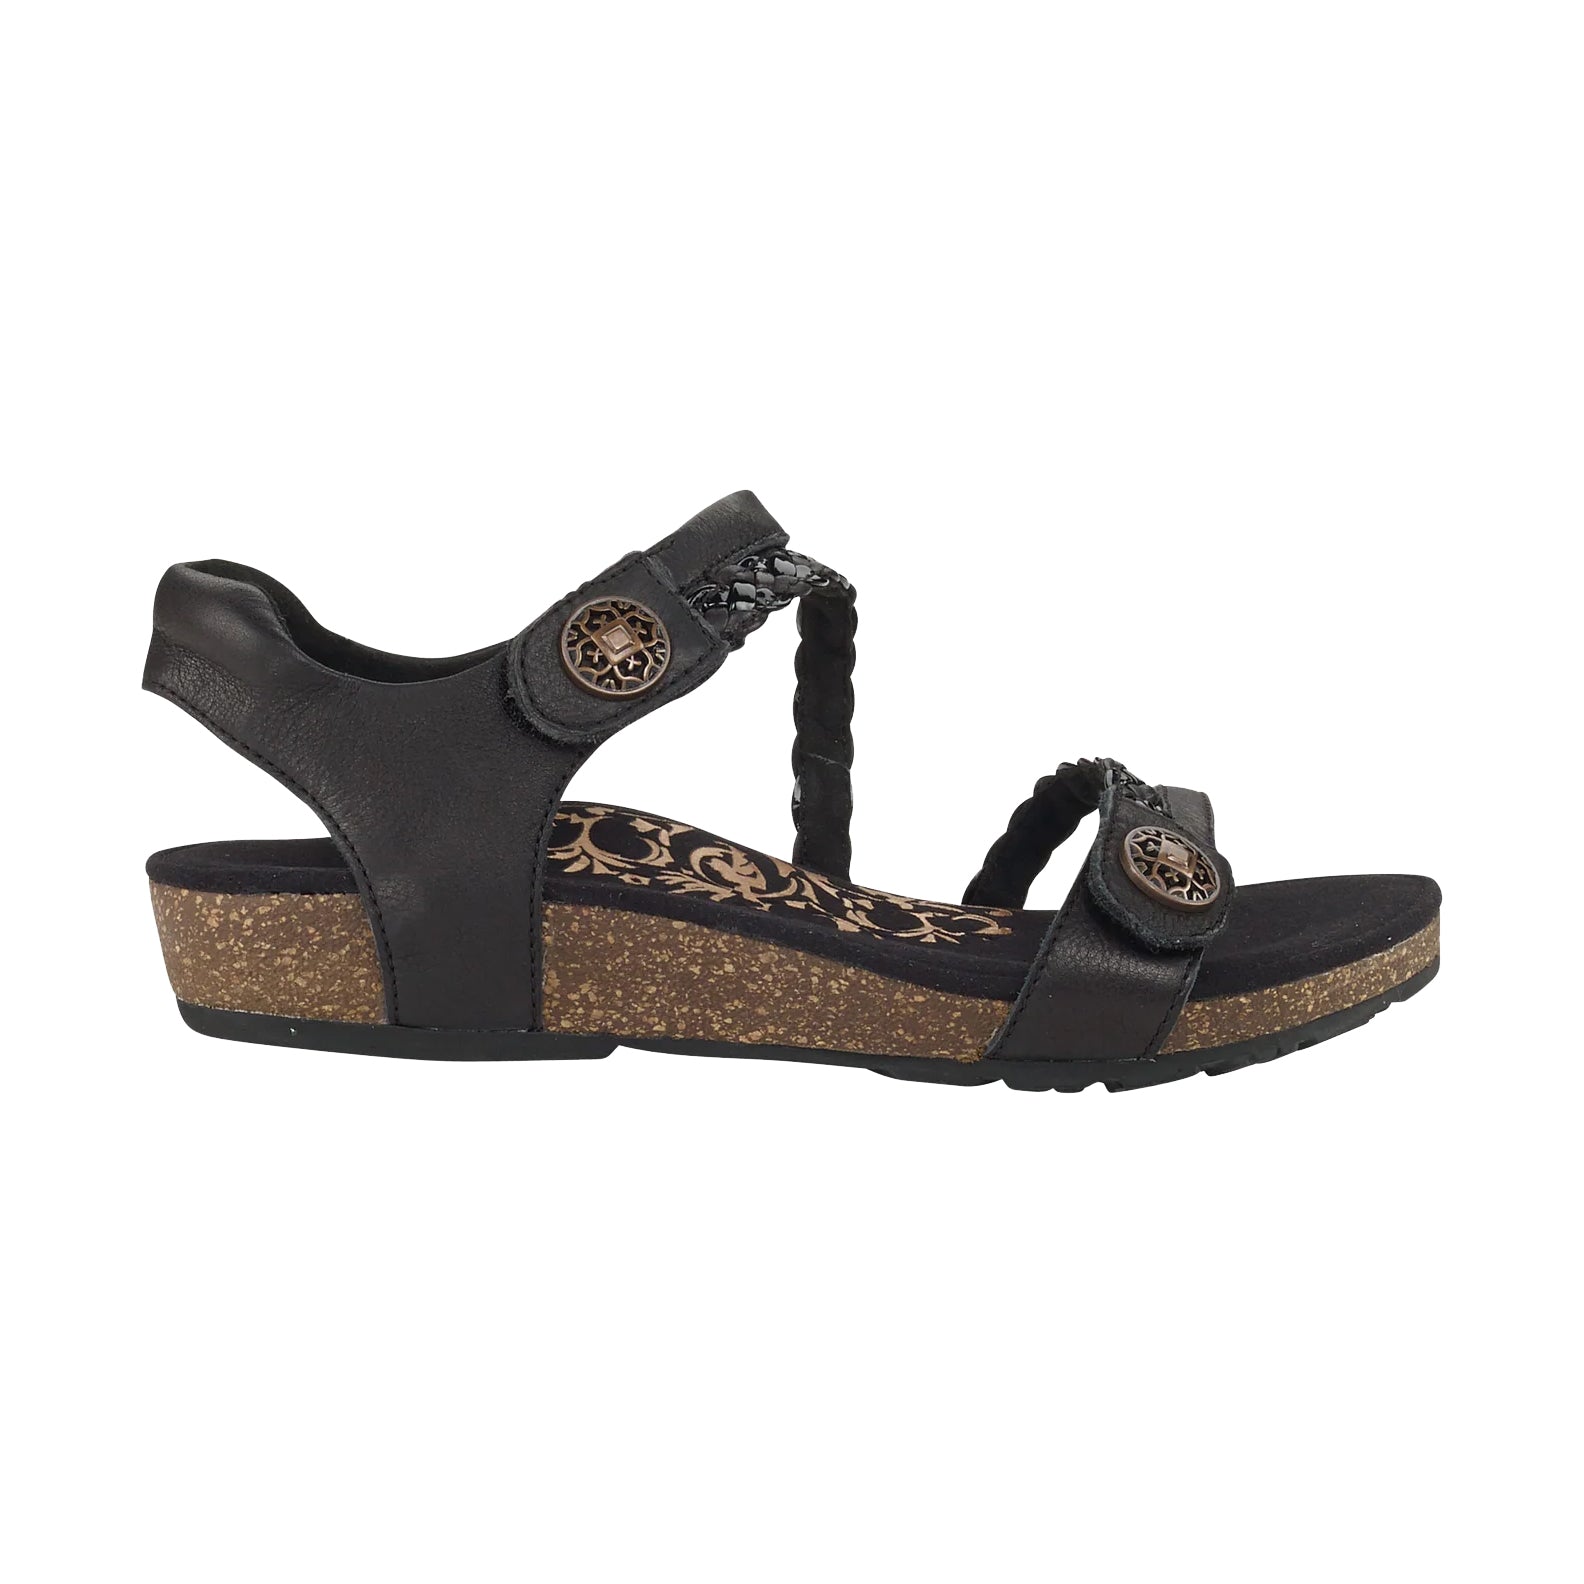 Aetrex Jillian Black - Womens wedge sandal with decorative accents and arch support.